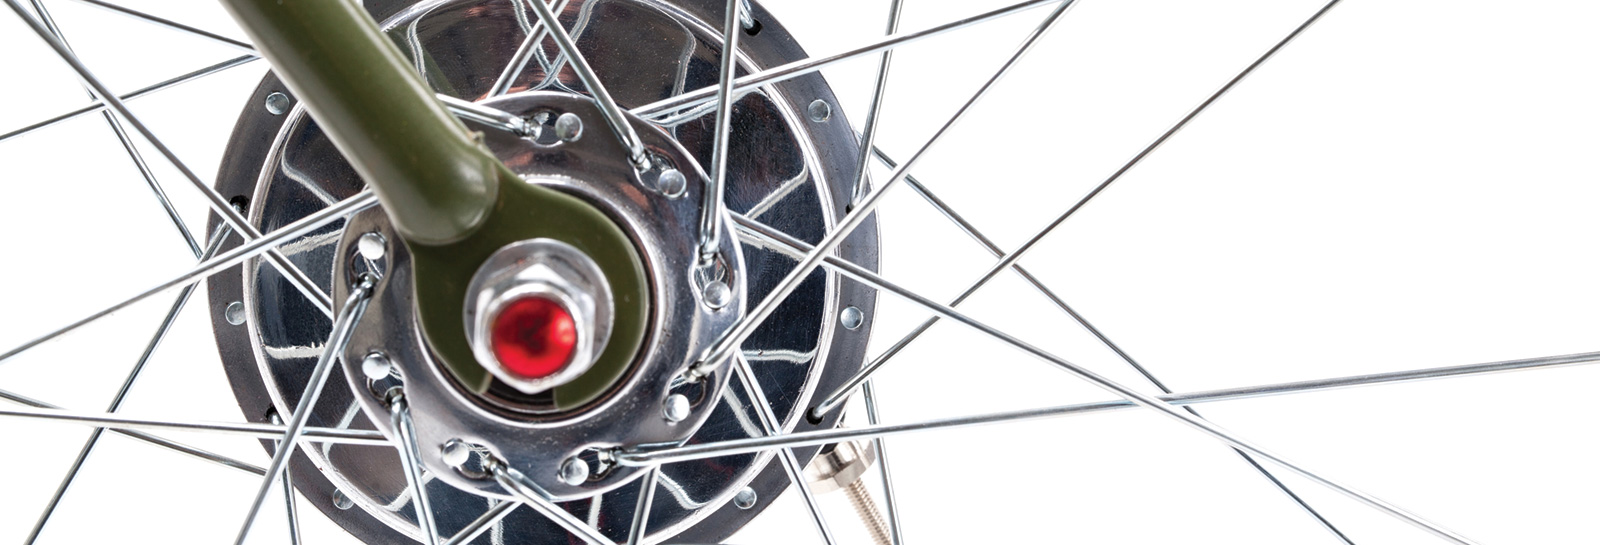 close-up photo of bicycle wheel